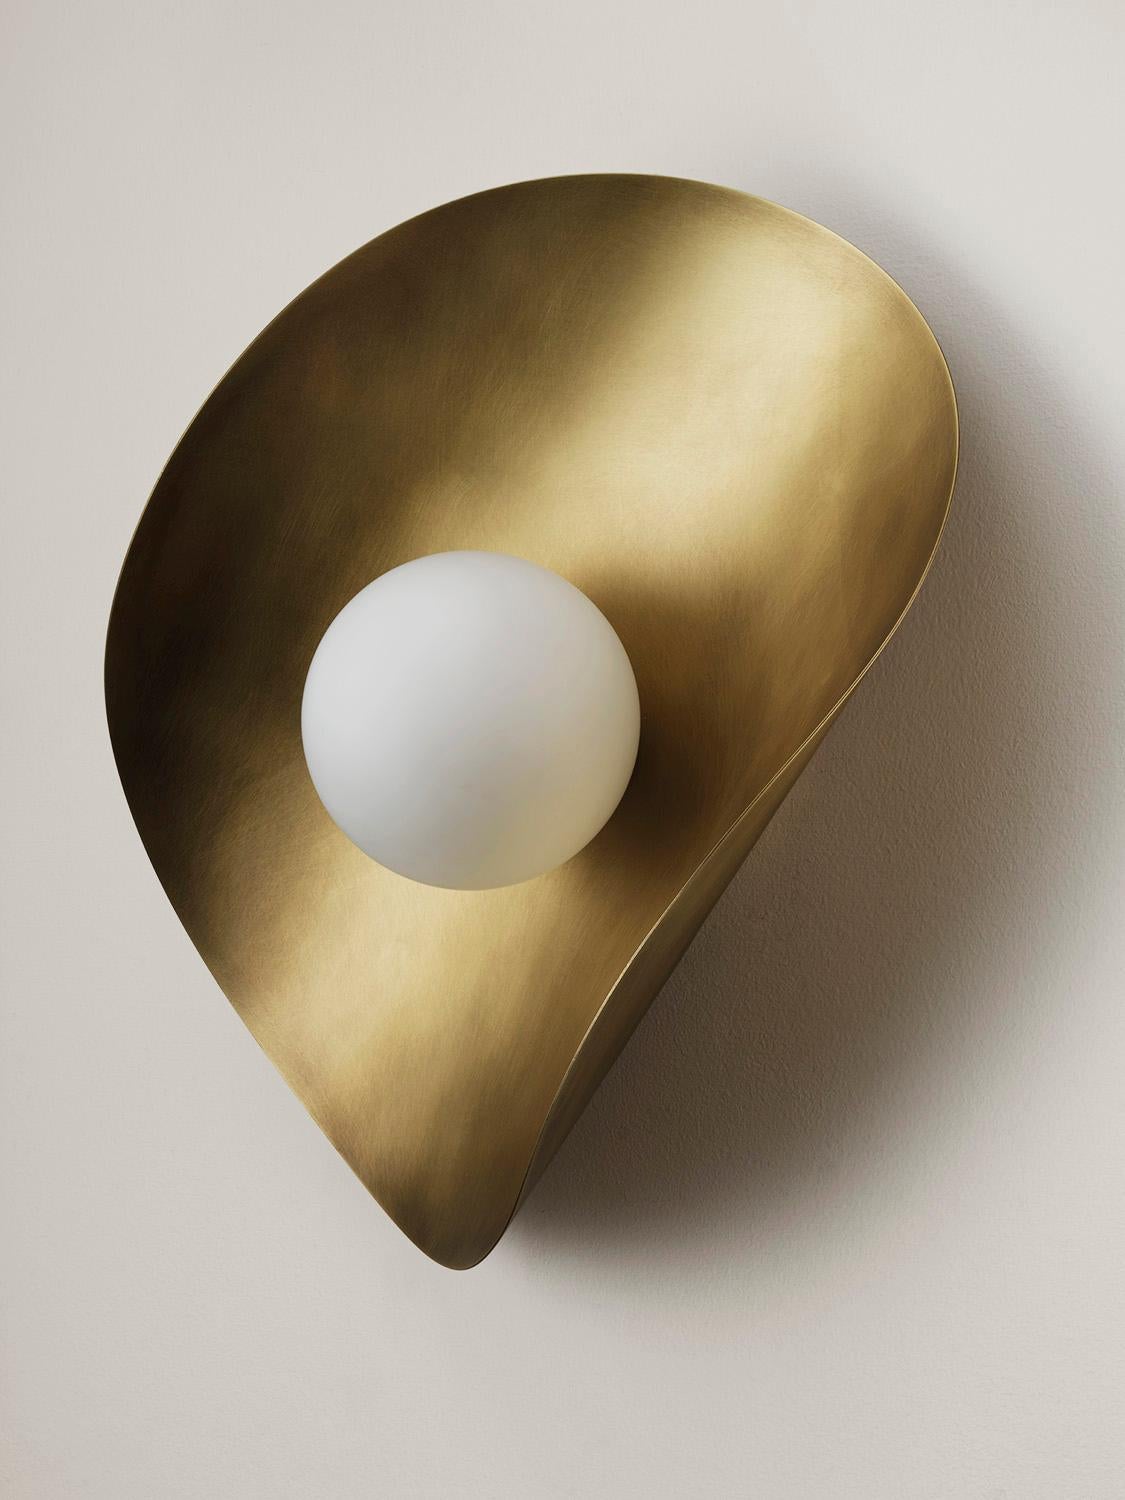 MONTERA Wall Sconce or Flushmount , biomorphic Brass & Glass, Blueprint Lighting In New Condition For Sale In New York, NY